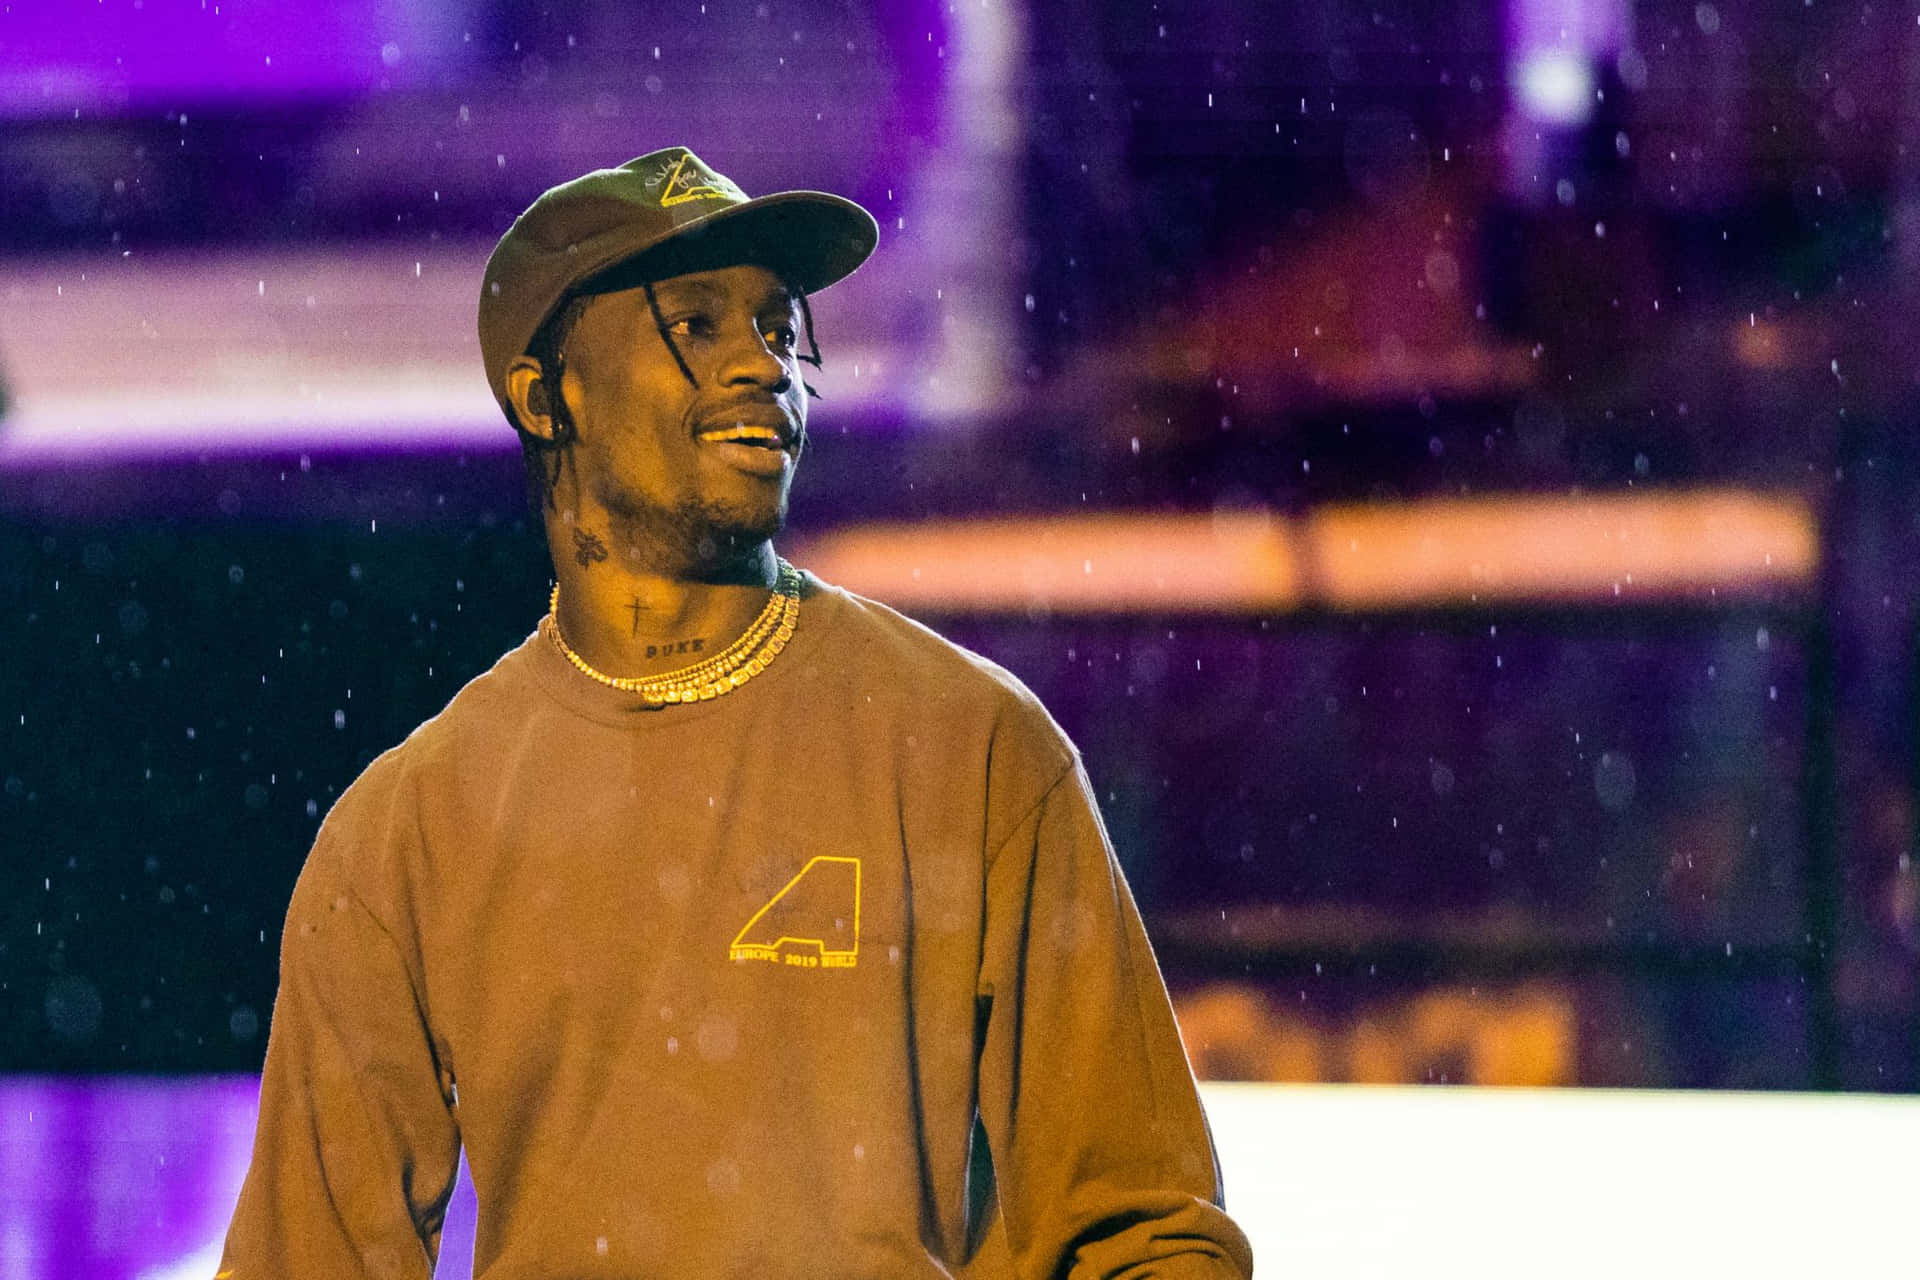 Travis Scott is making waves in the music industry!